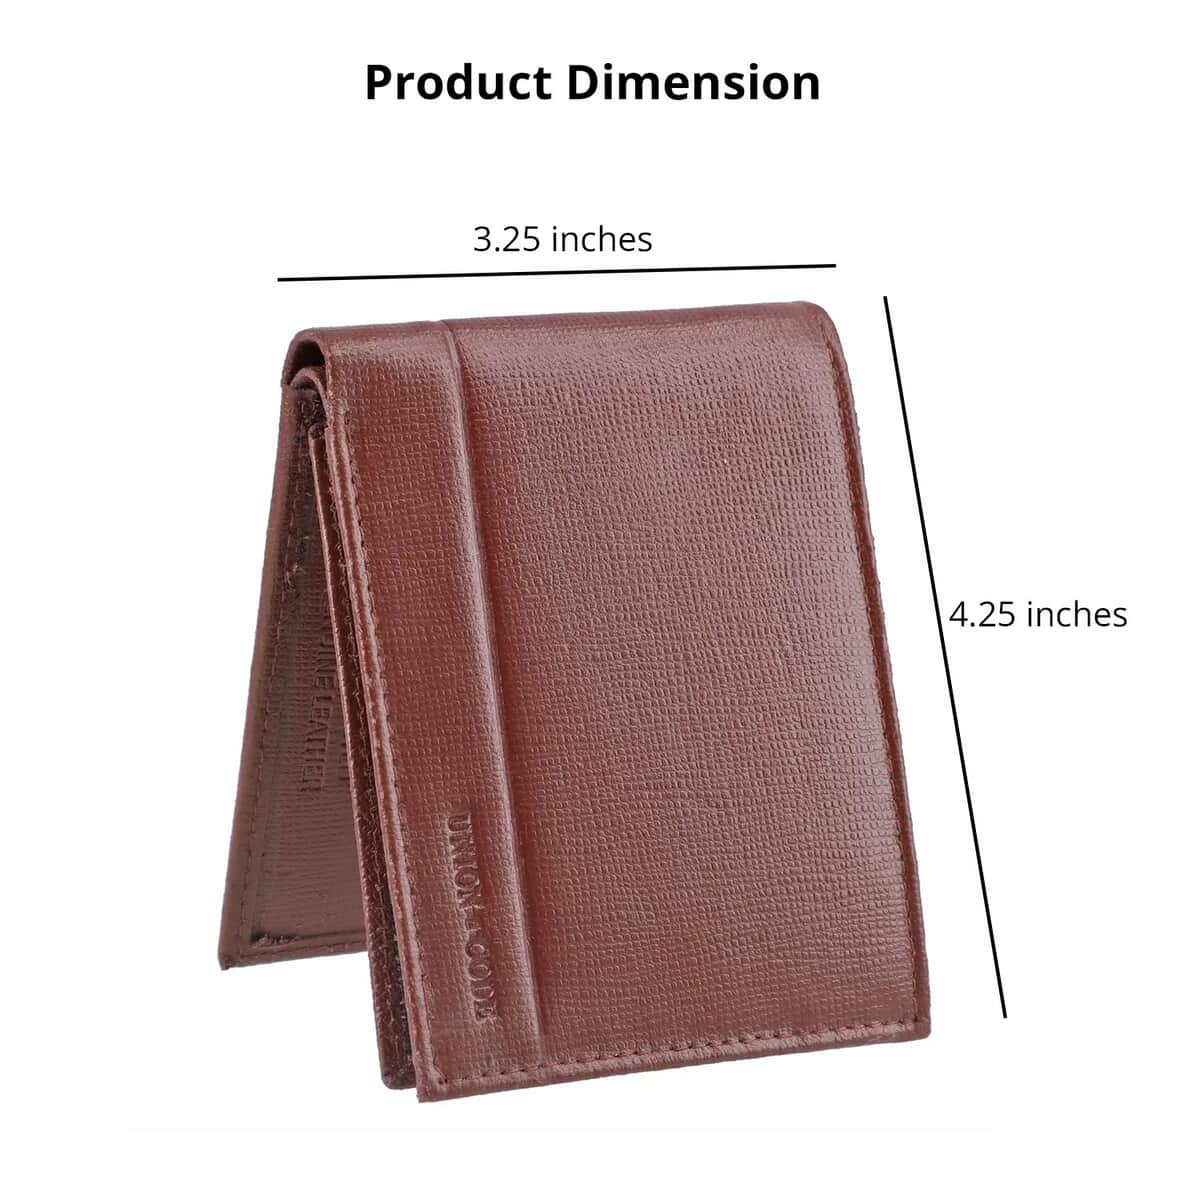 "UNION CODE Genuine Leather Bi Fold Men's Wallet (RFID Protected) SIZE: 4.25(L)x3.25(H) inches COLOR: Navy" image number 4